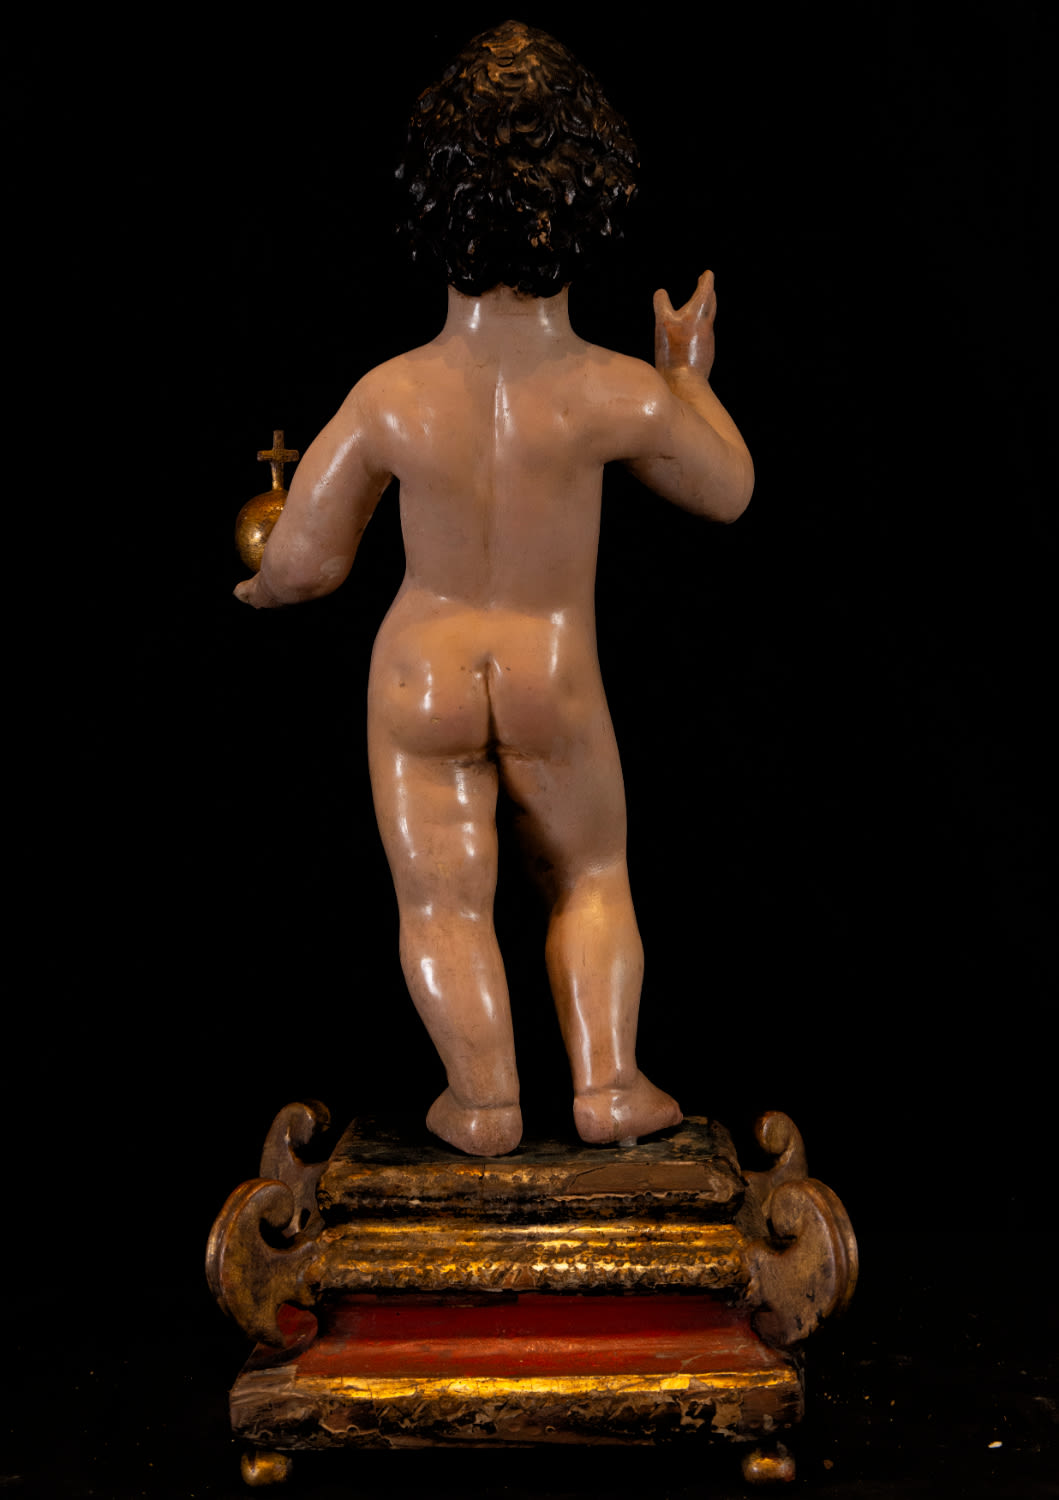 Sculpture of the Child of the Ball, Spanish school, 17th century - Image 4 of 4